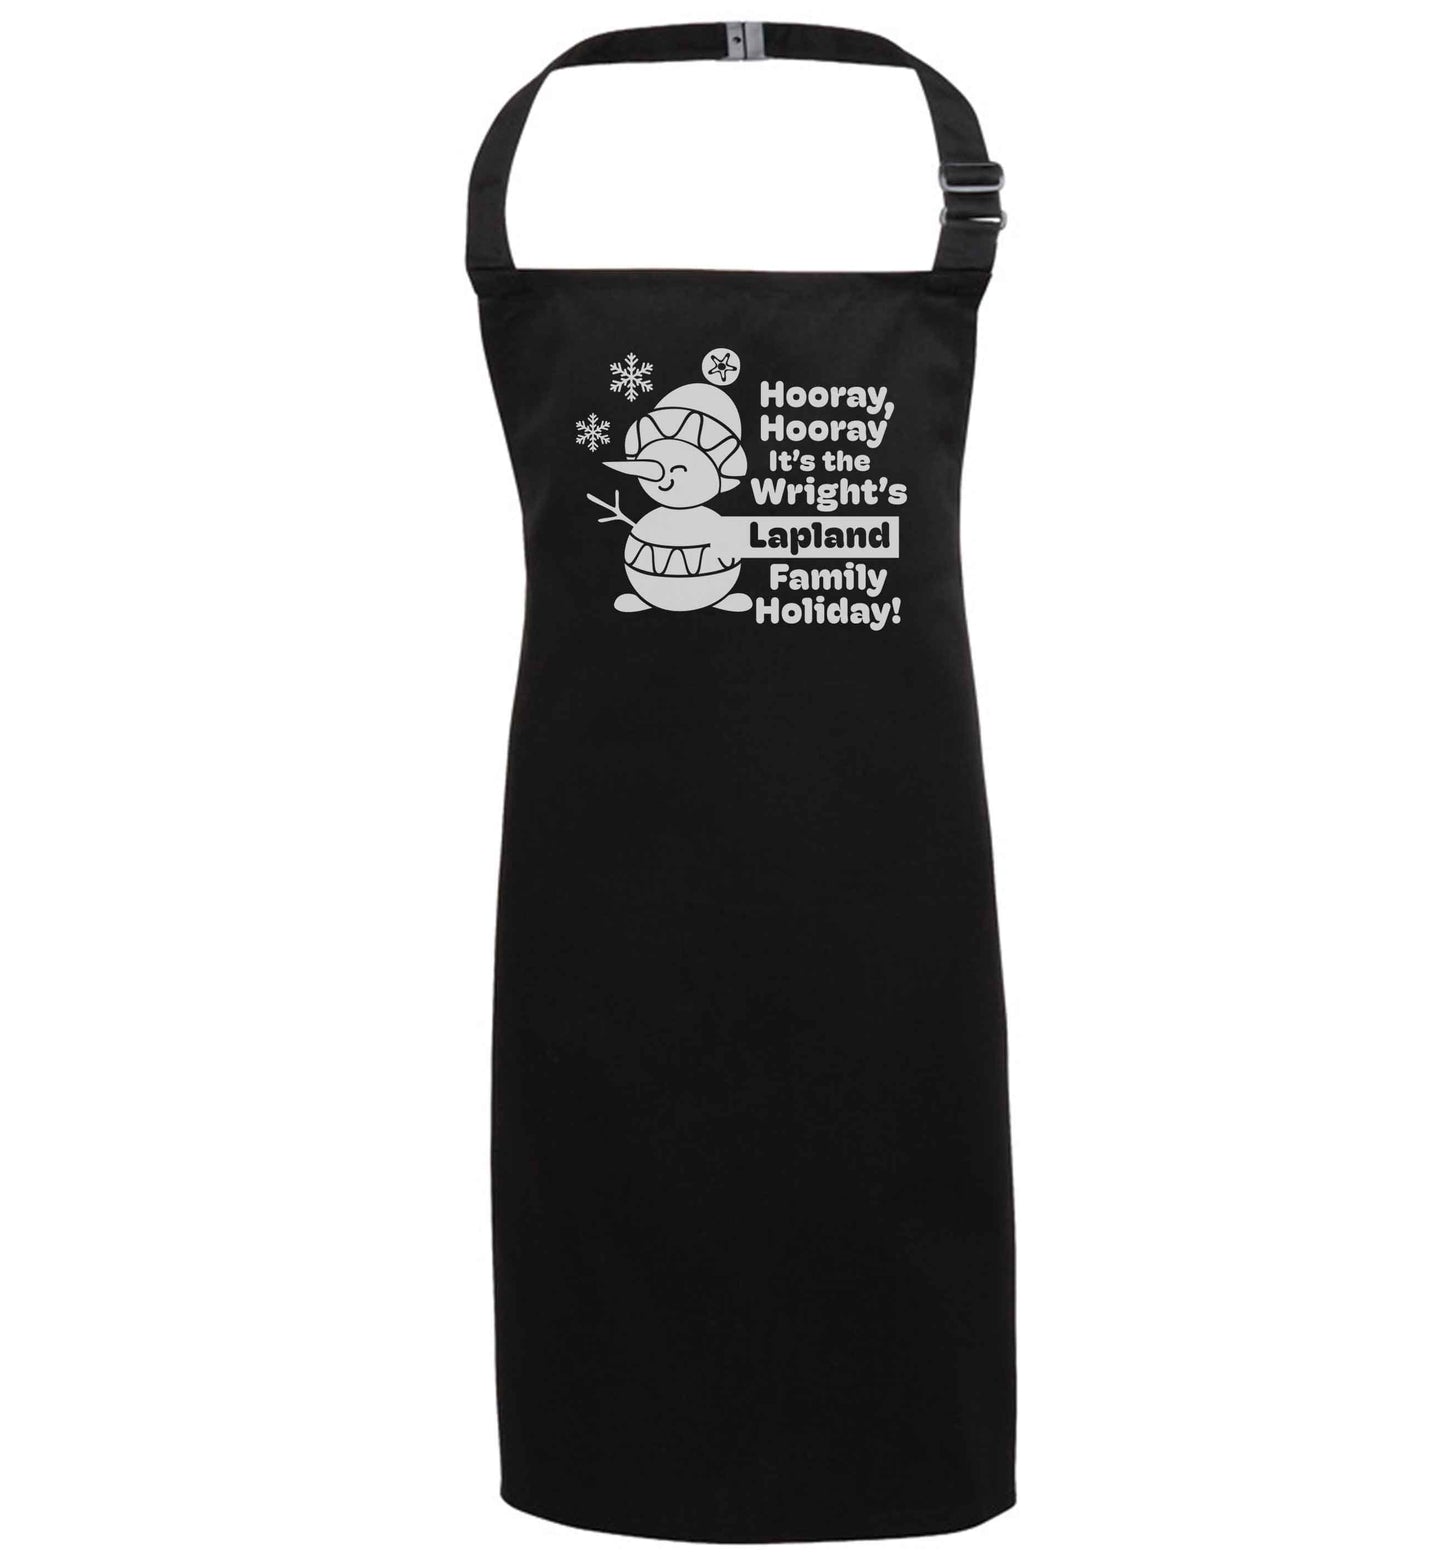 Hooray it's the personalised Lapland holiday! black apron 7-10 years